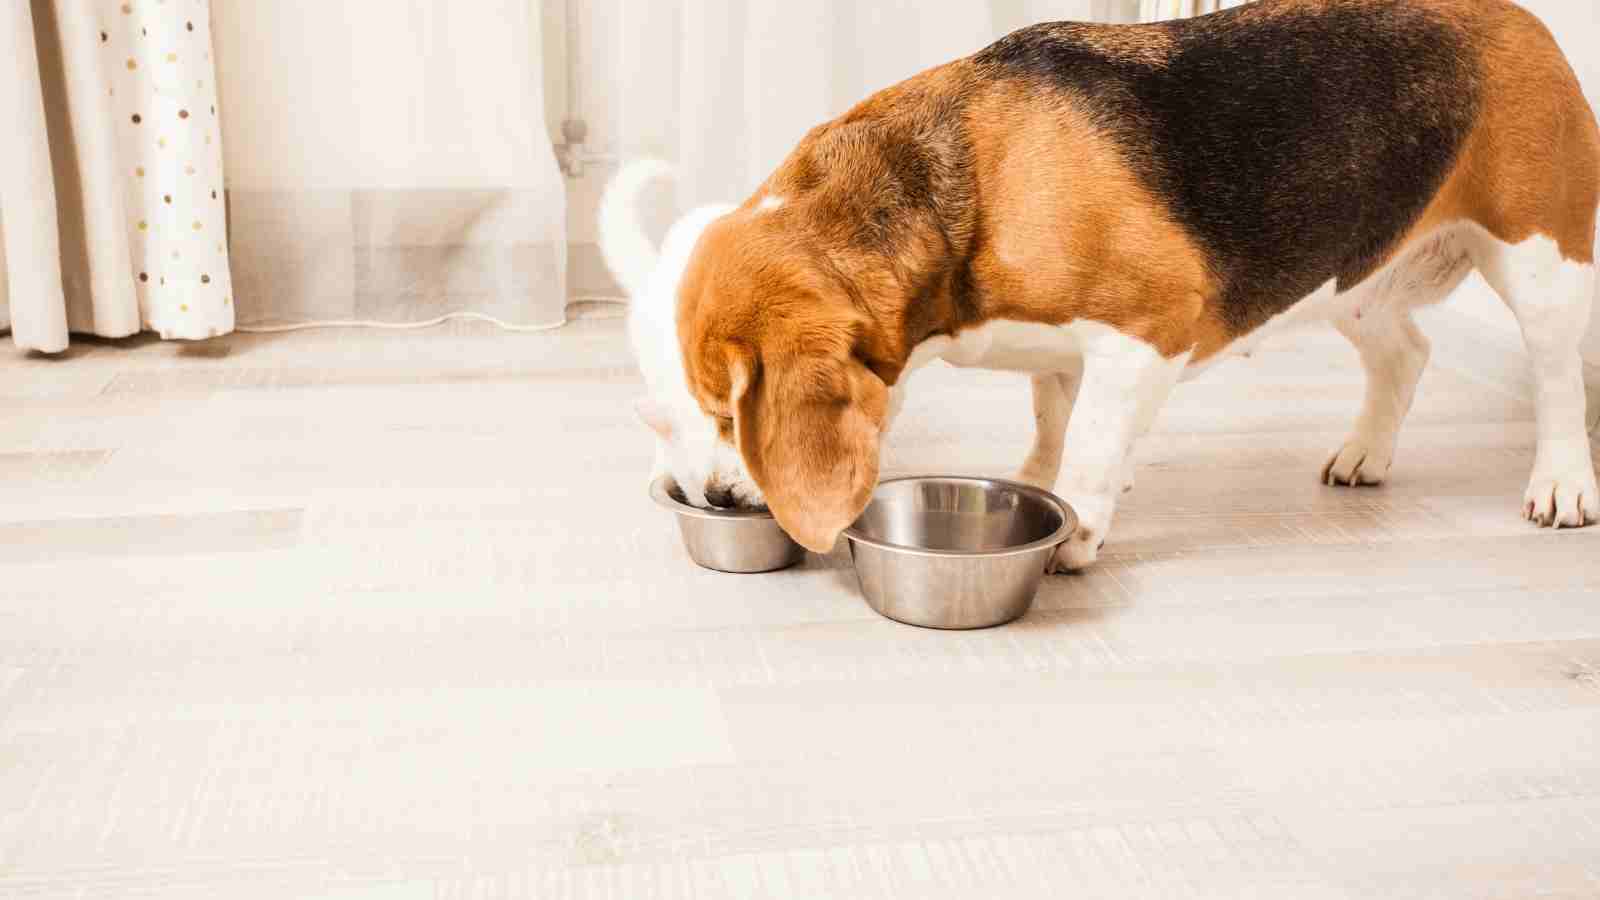 Pet Friendly Features You Can Incorporate In Your House